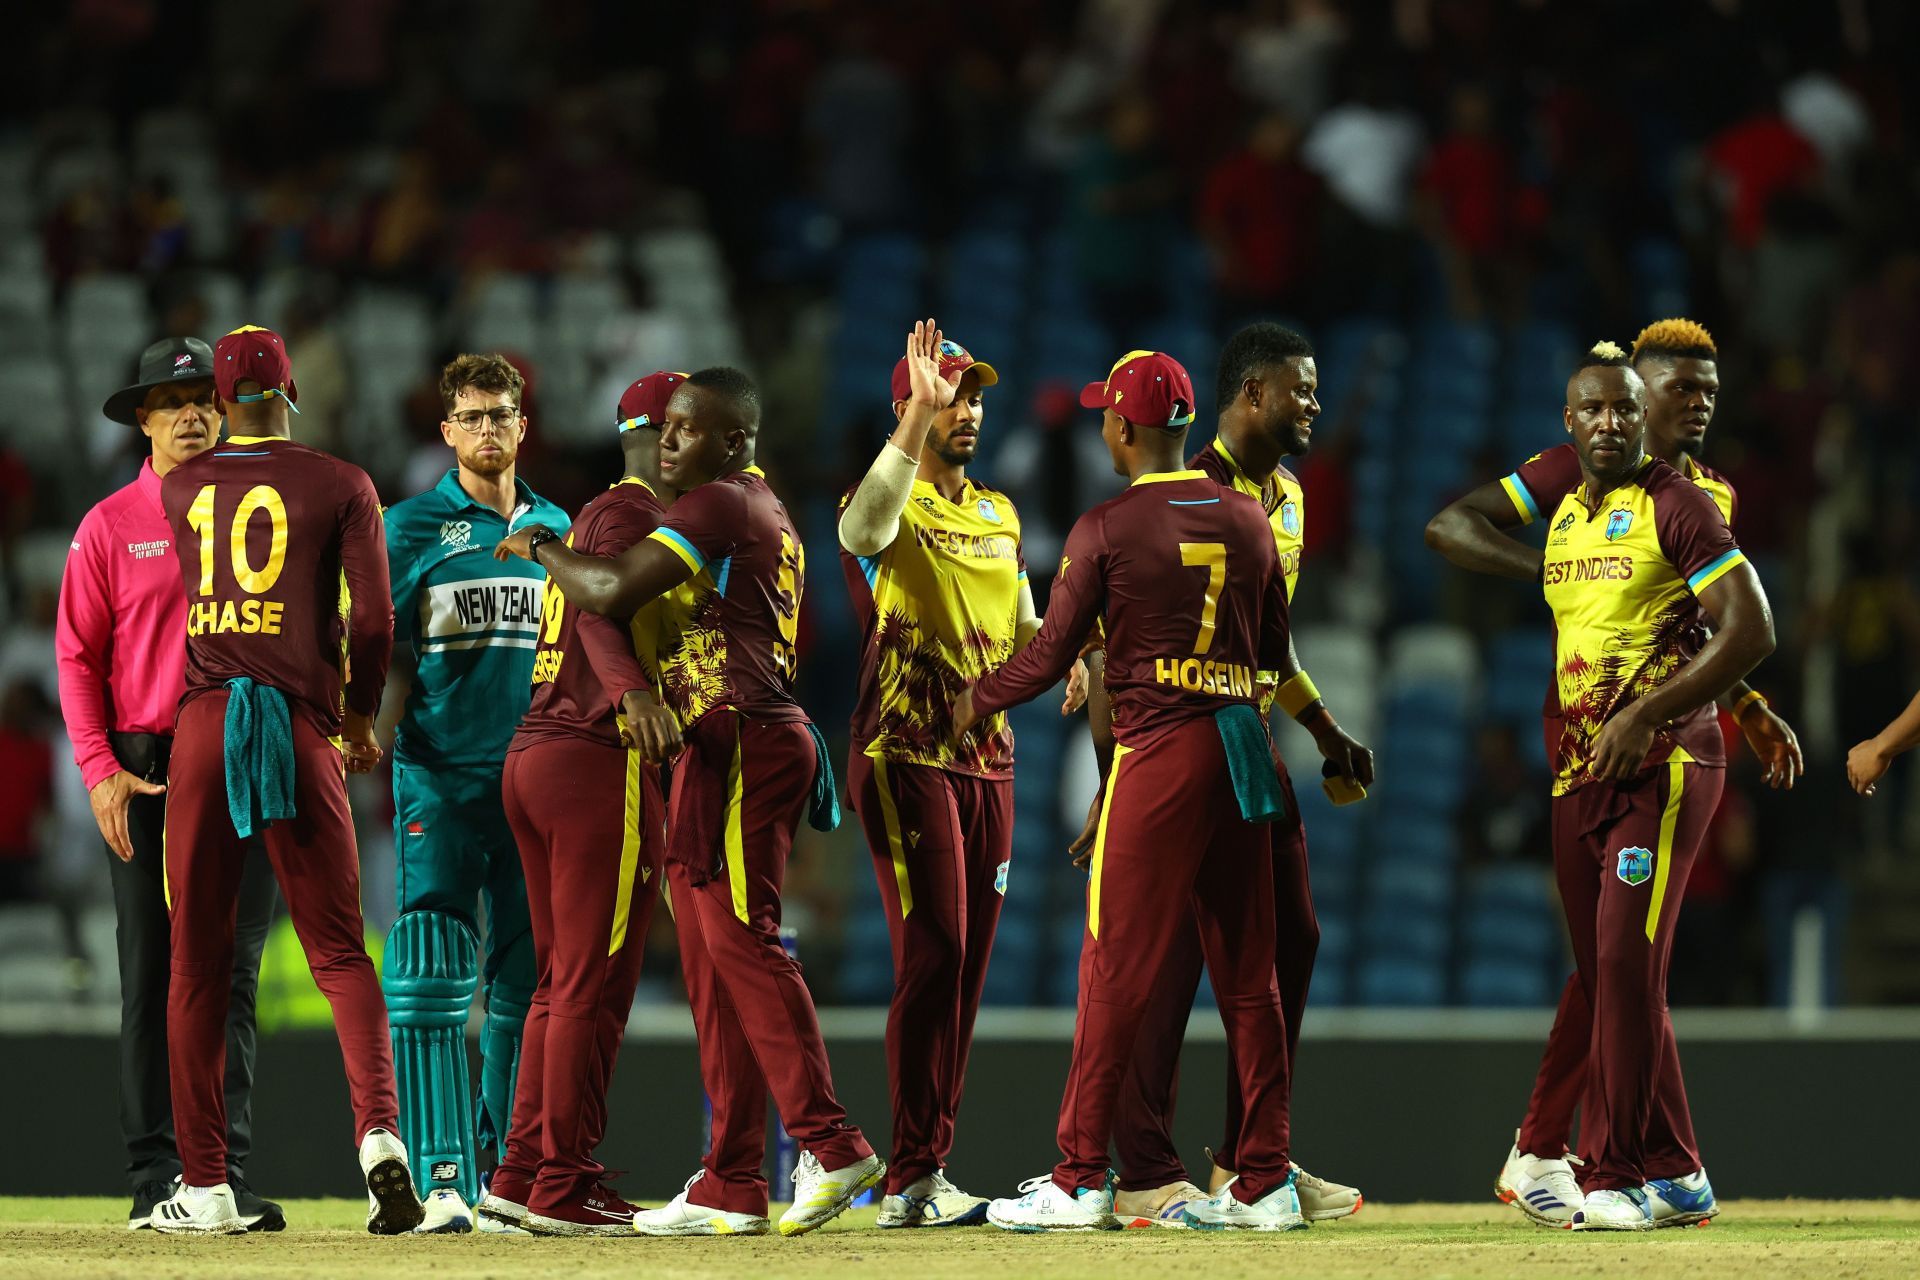 West Indies leapfrog England to No. 3 in latest ICC T20I rankings